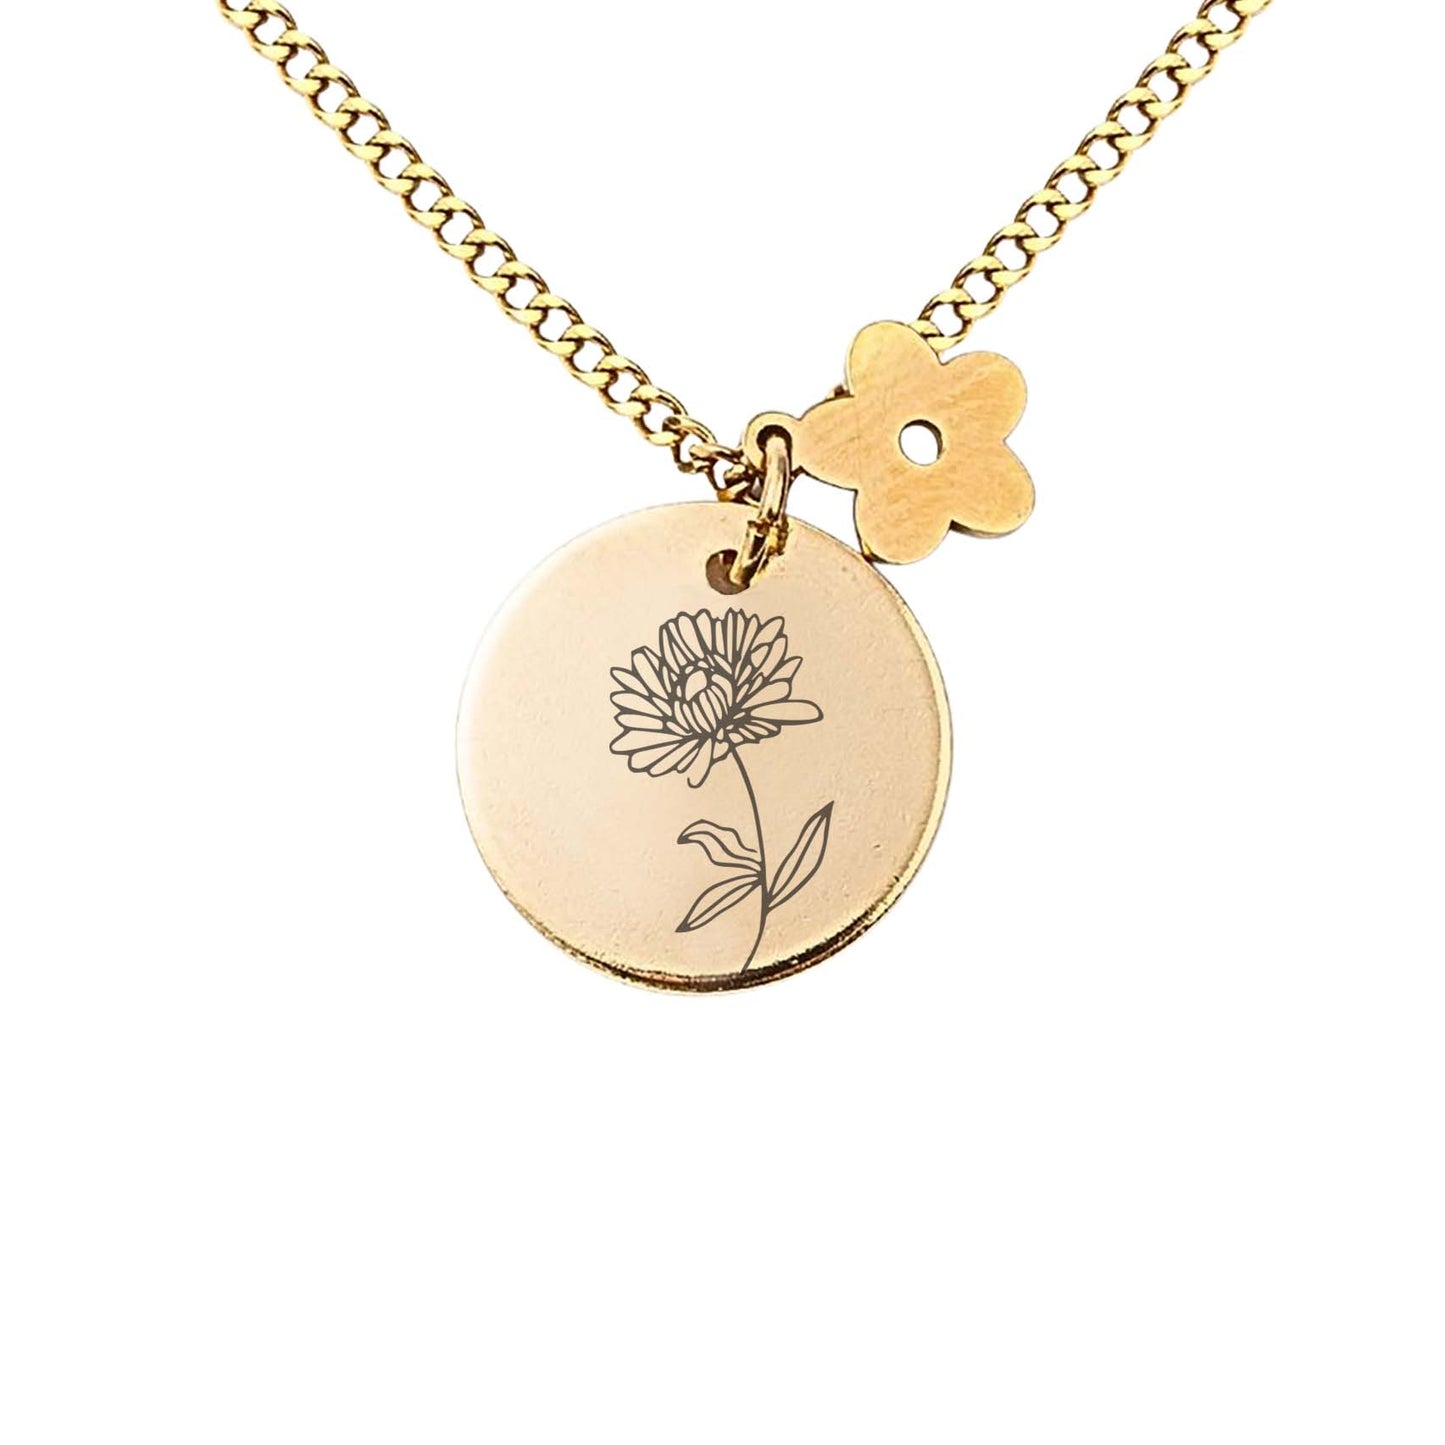 Round brand five petal flower necklace plated with 18K gold, engraving with 12 Month Birthdflowers, pendant necklace, birthday gift, for girlfriend and motherss028